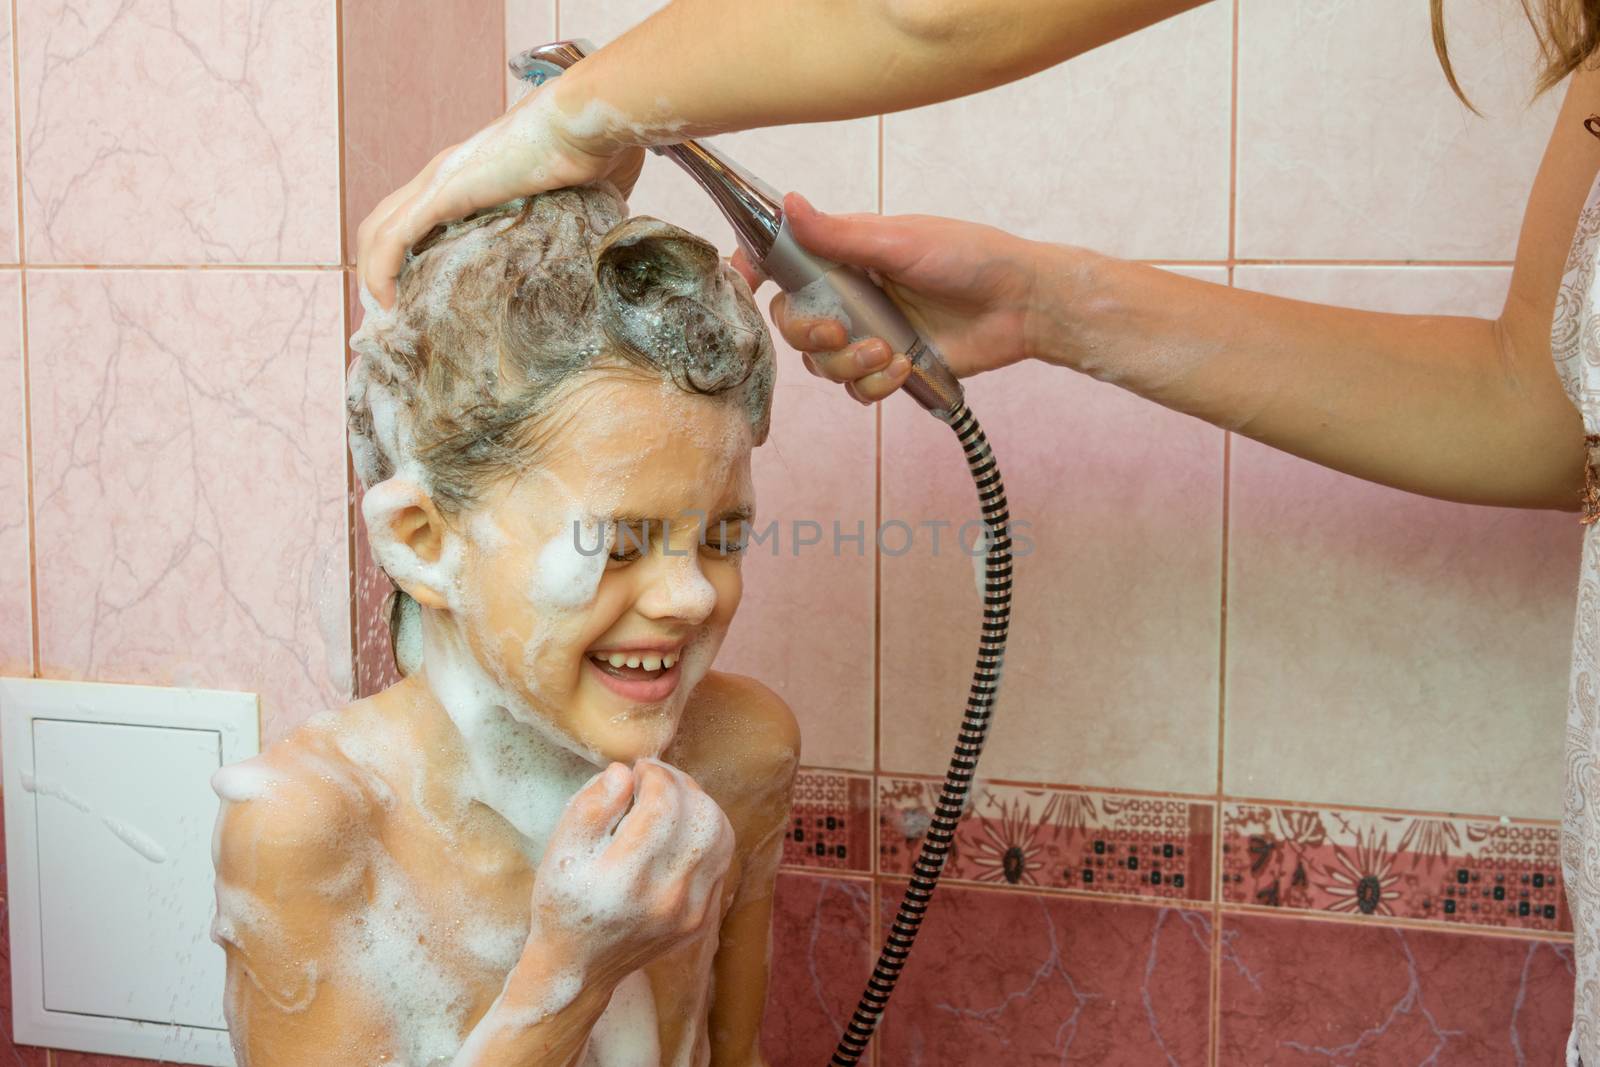 Mom washes the soap and shampoo in the shower with a seven-year daughter